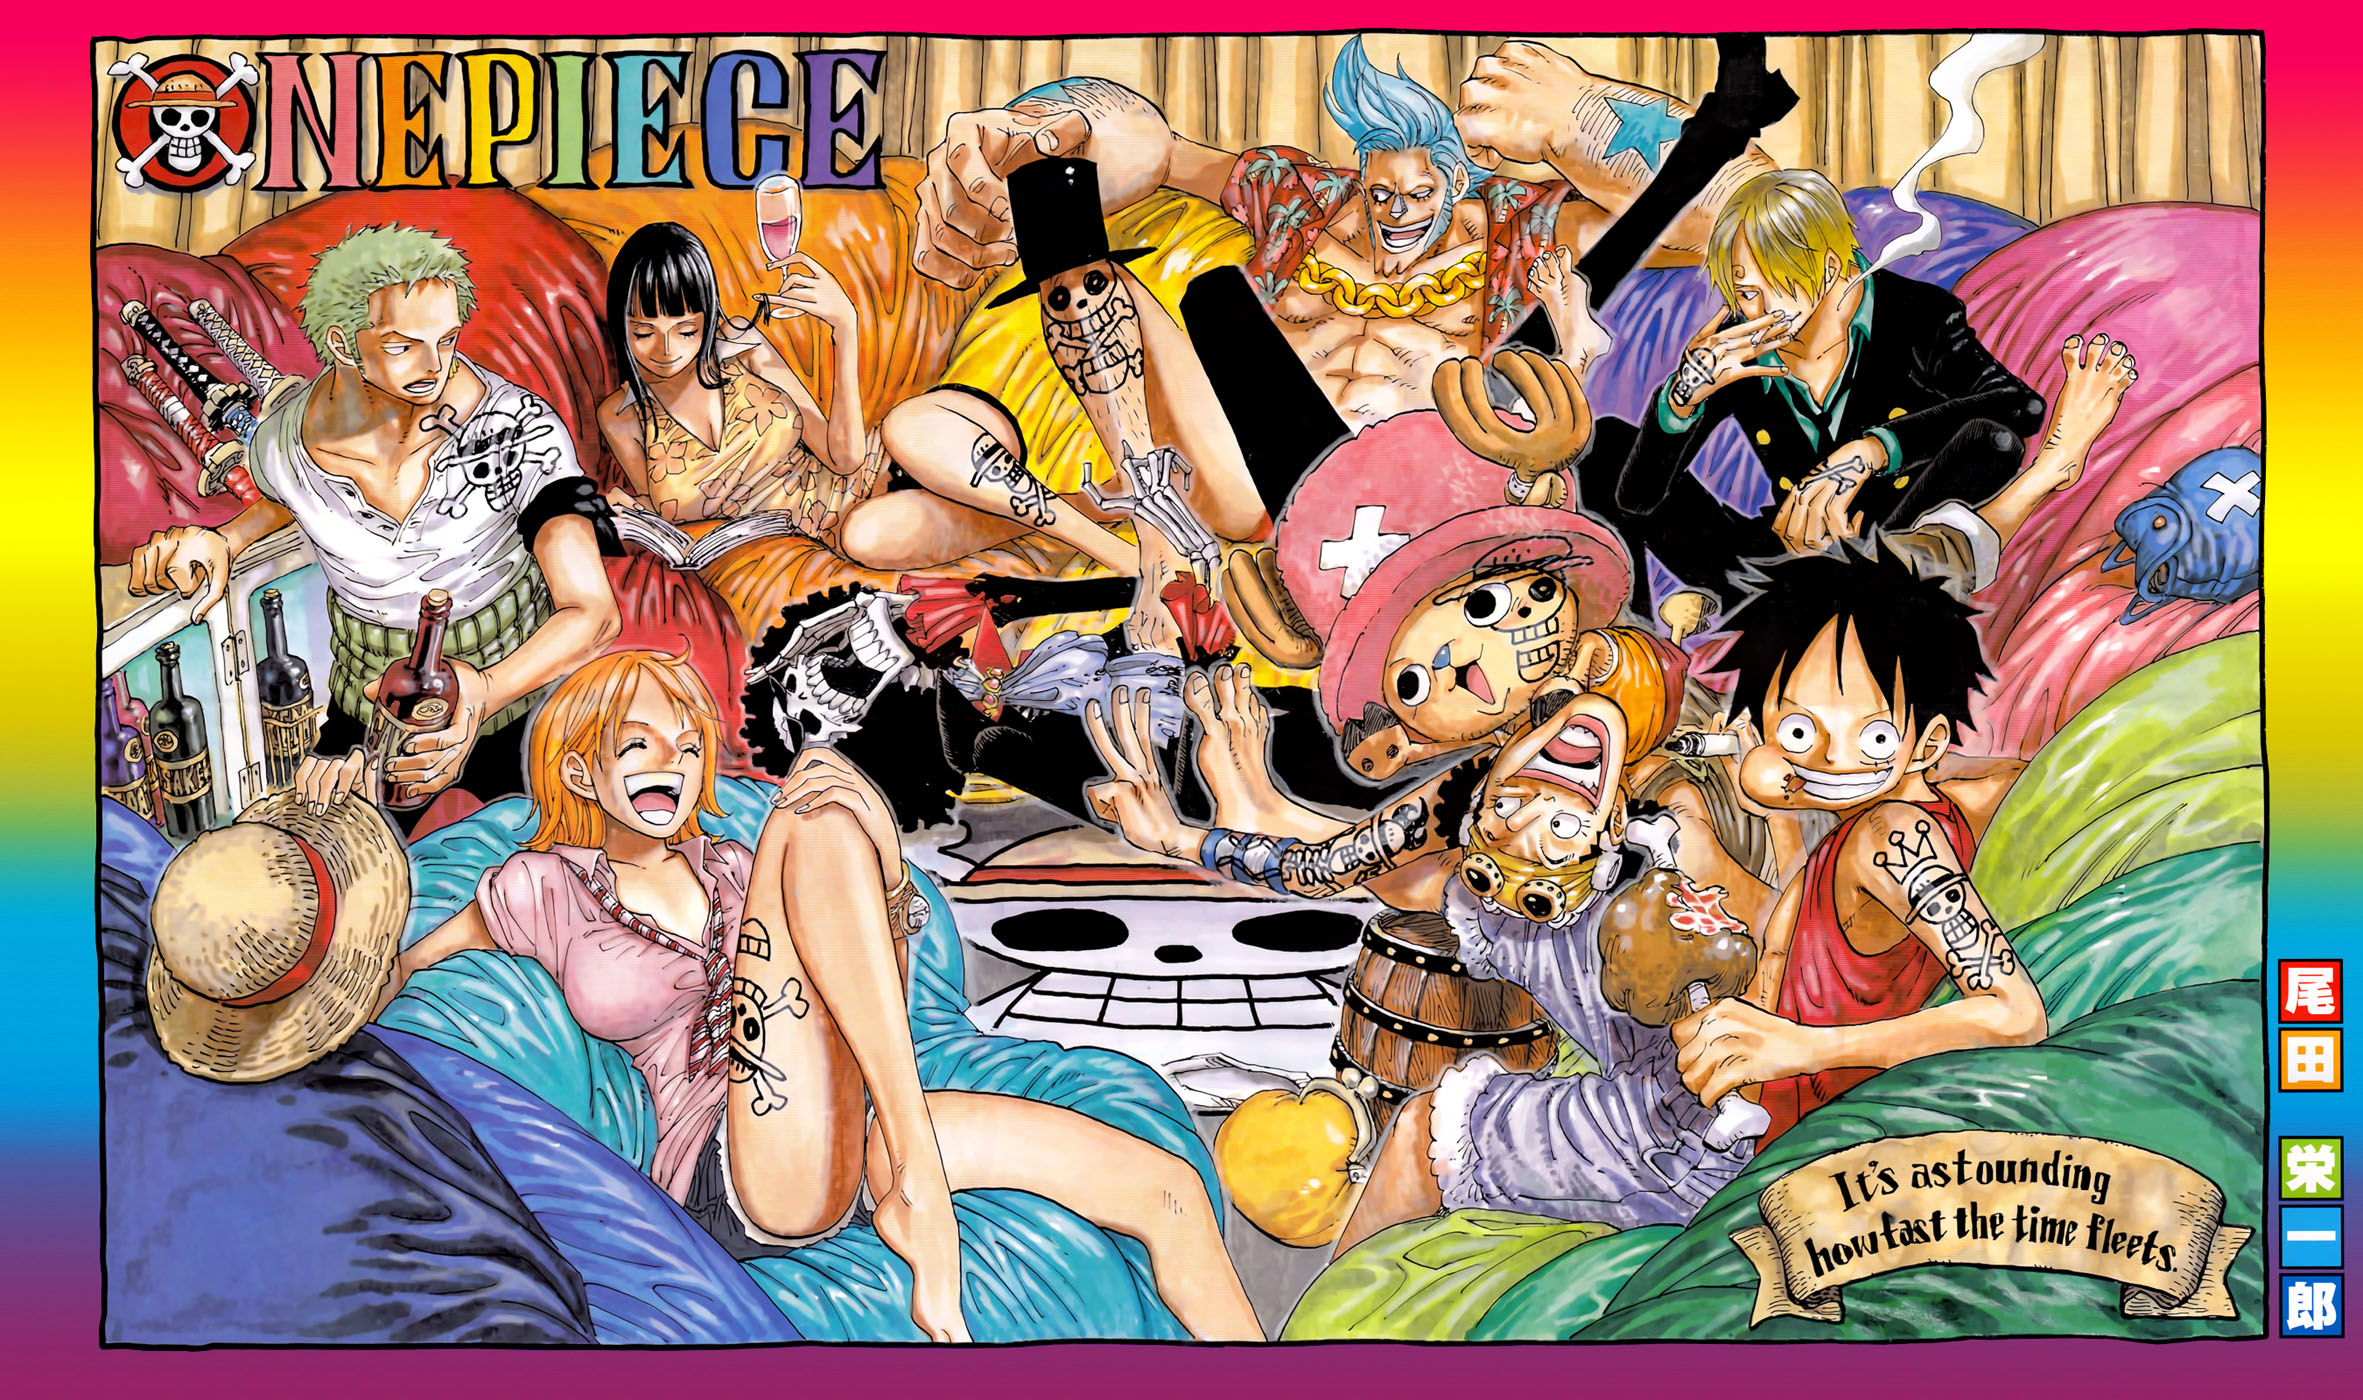 One piece Revealed these INSANE bouties - Chapter 1058 colored! 